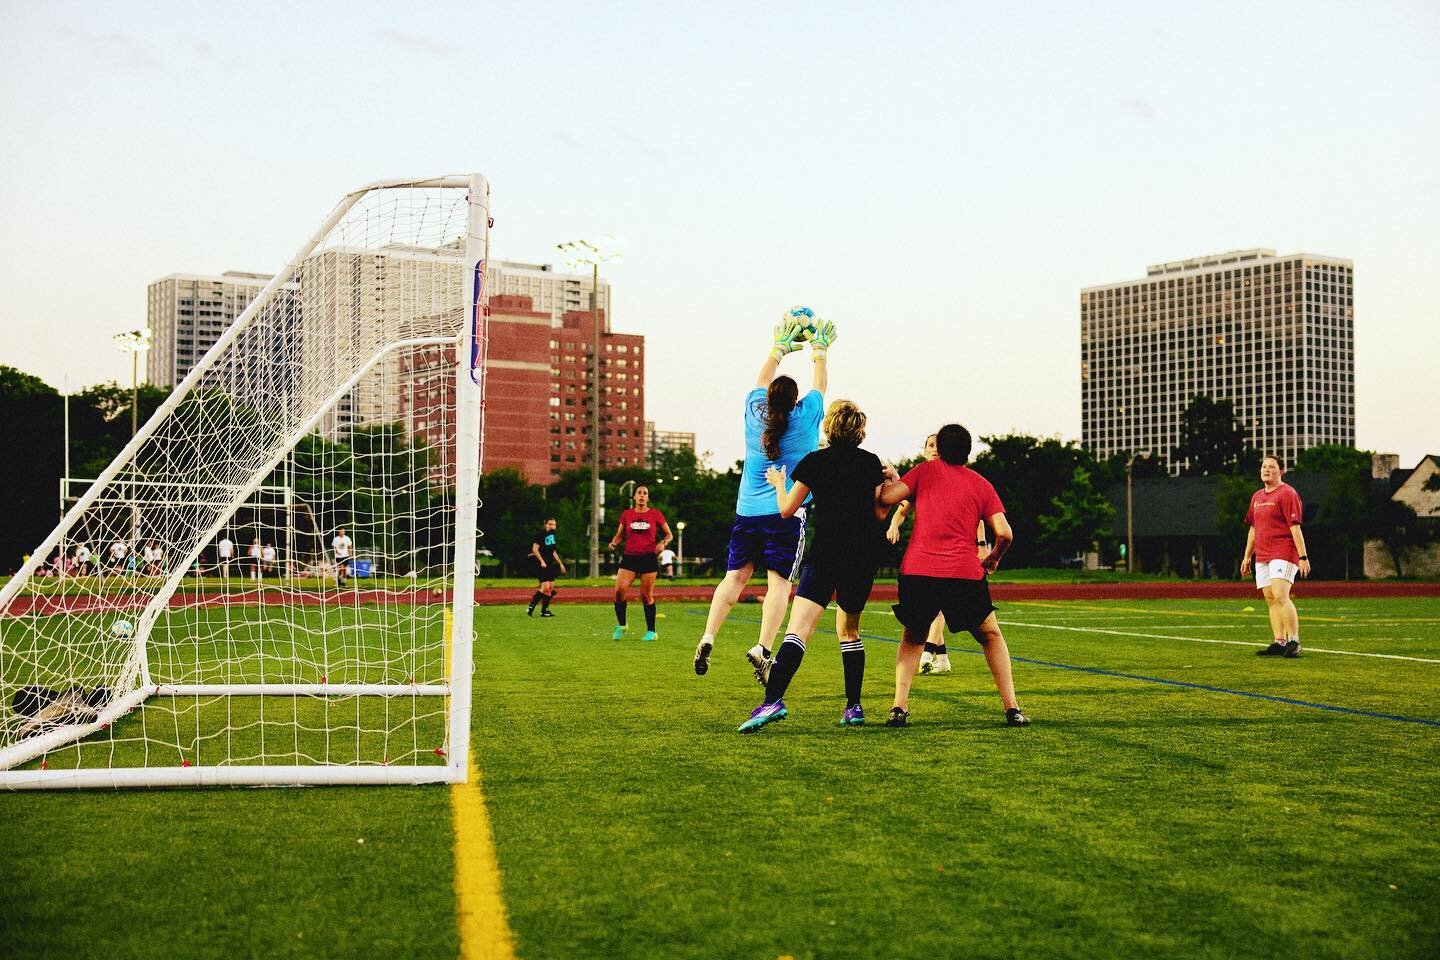 Summer Sun = More Soccer Fun 

Summer Soccer leagues are almost here and sign ups are still open! Sign up link(s) in bio! 

🥅 Friday Night Soccer at The Fire Pitch
League Starts: 5/12
Registration Closes: 5/9 @ noon
 
⚽️Summer League Dates: 

Beginn